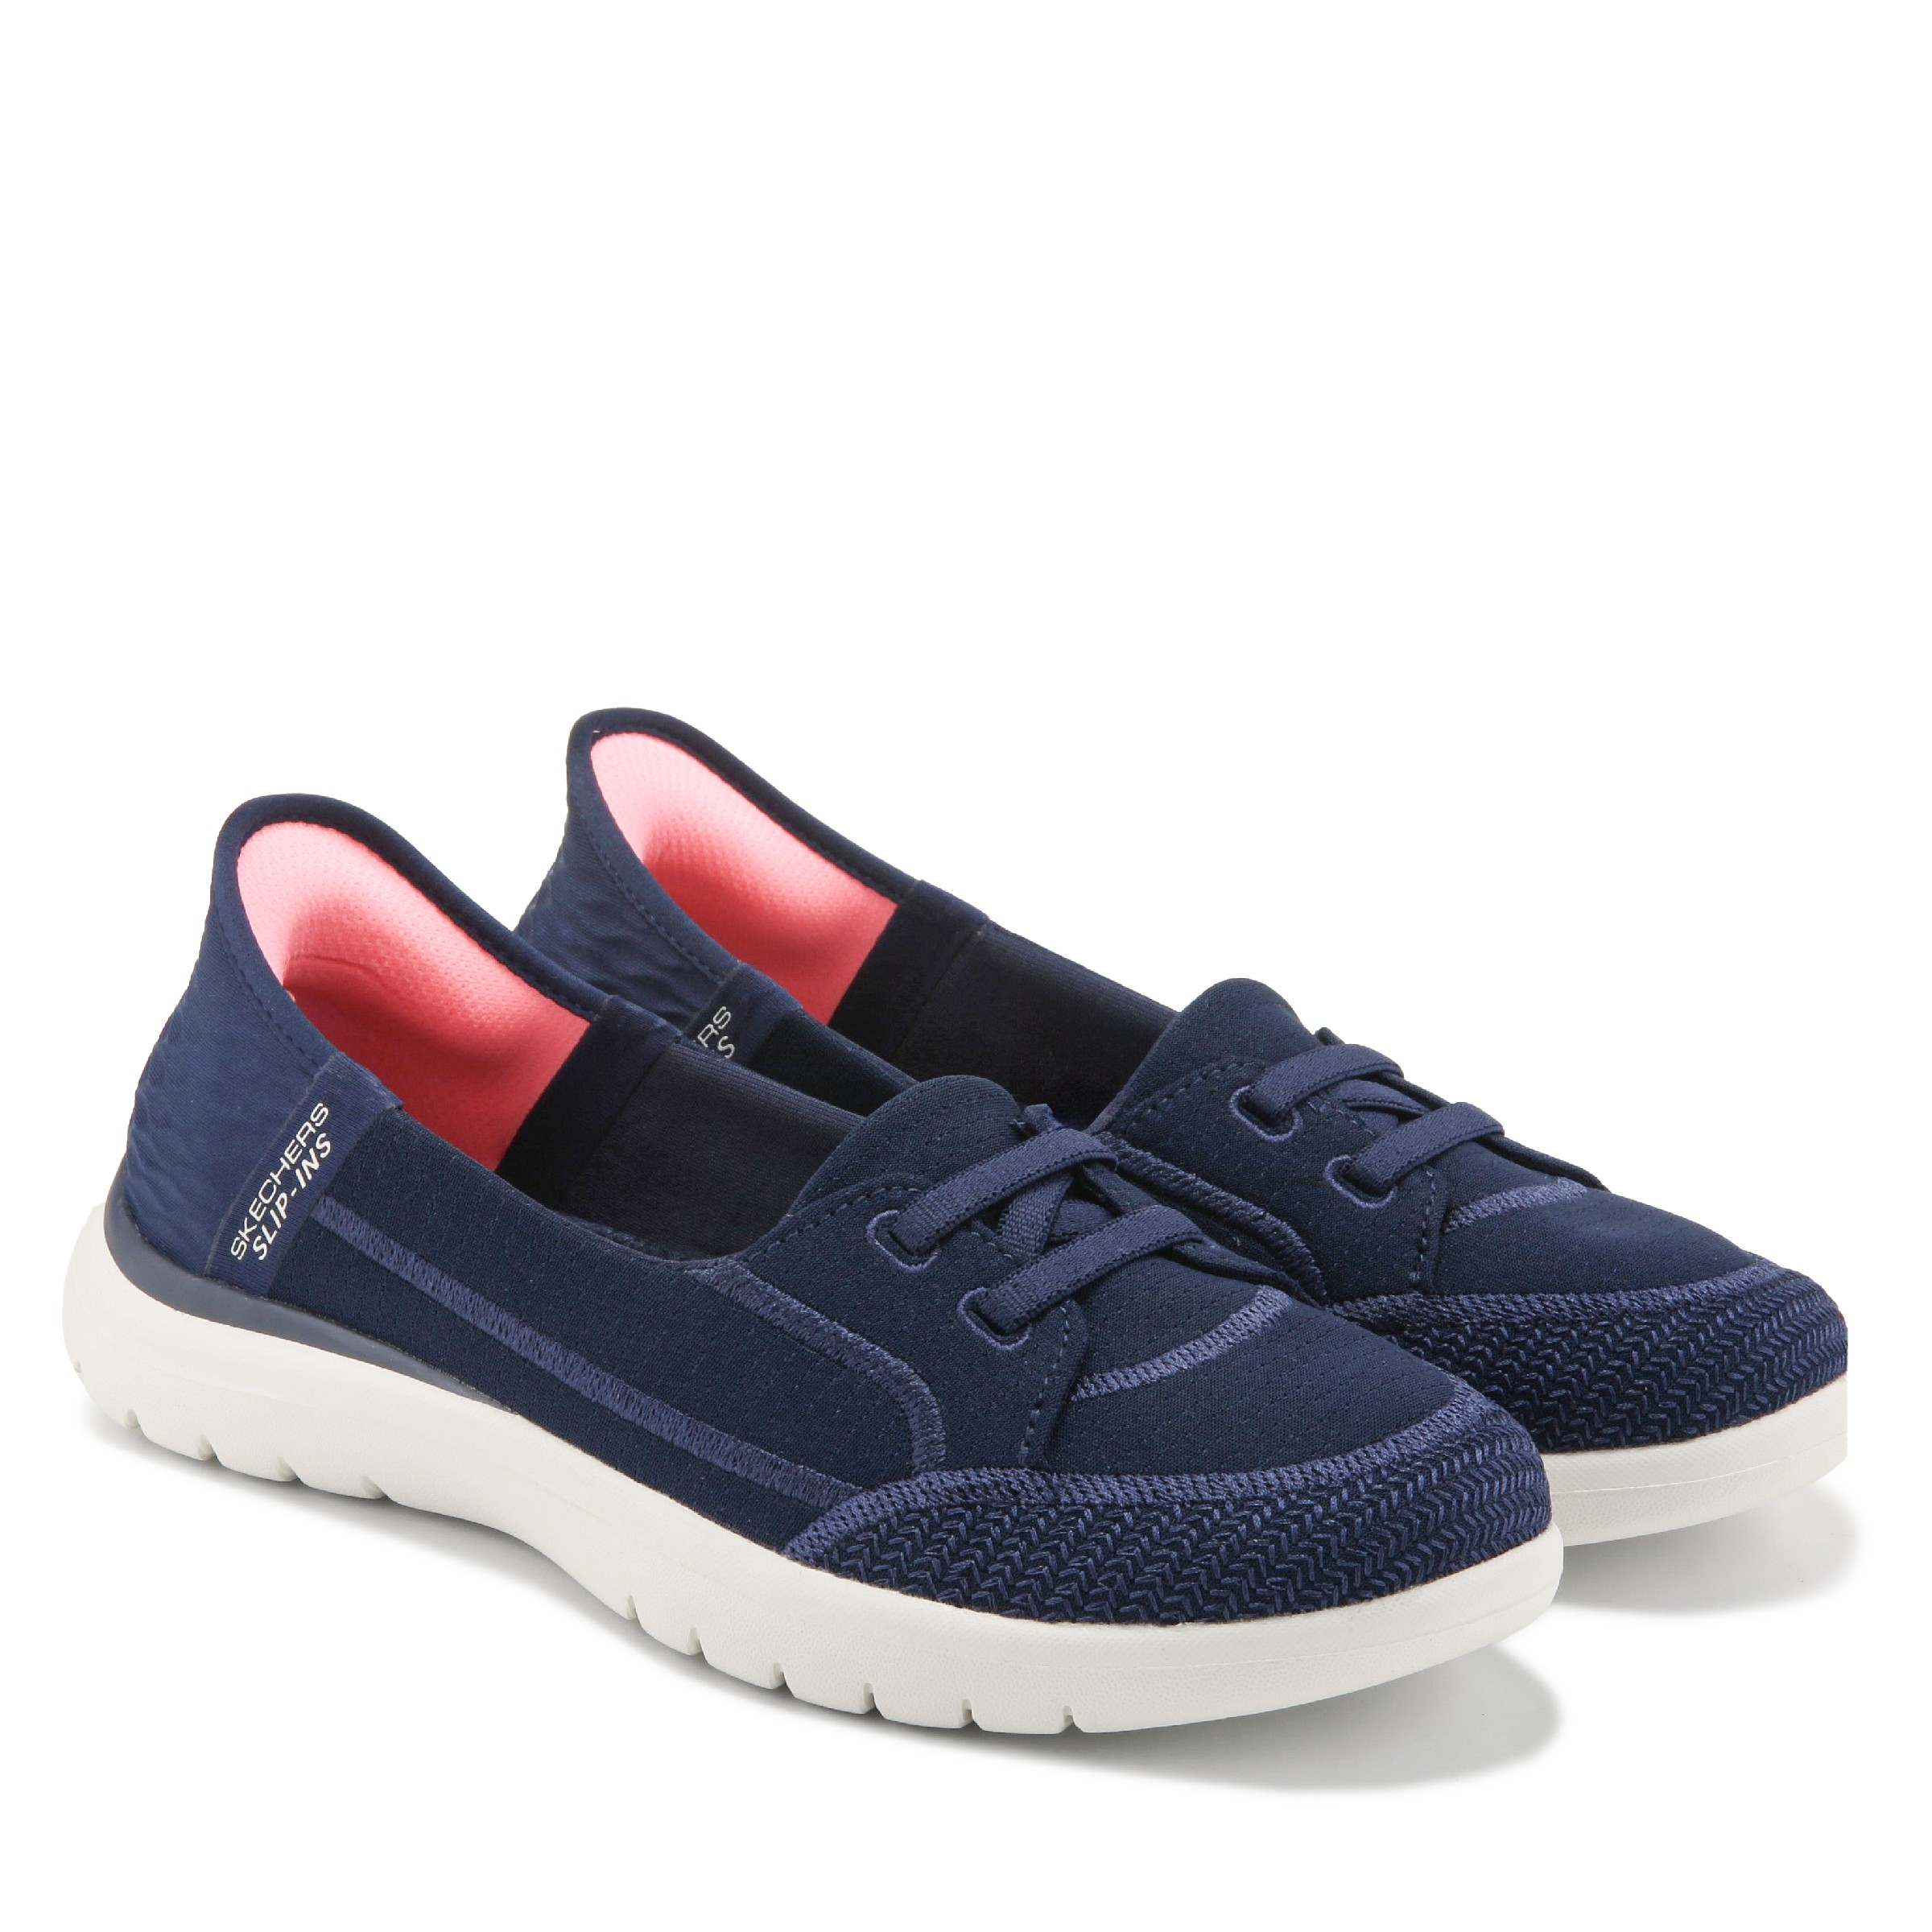 ON-THE-GO FLEX Casual Slip-On Shoes